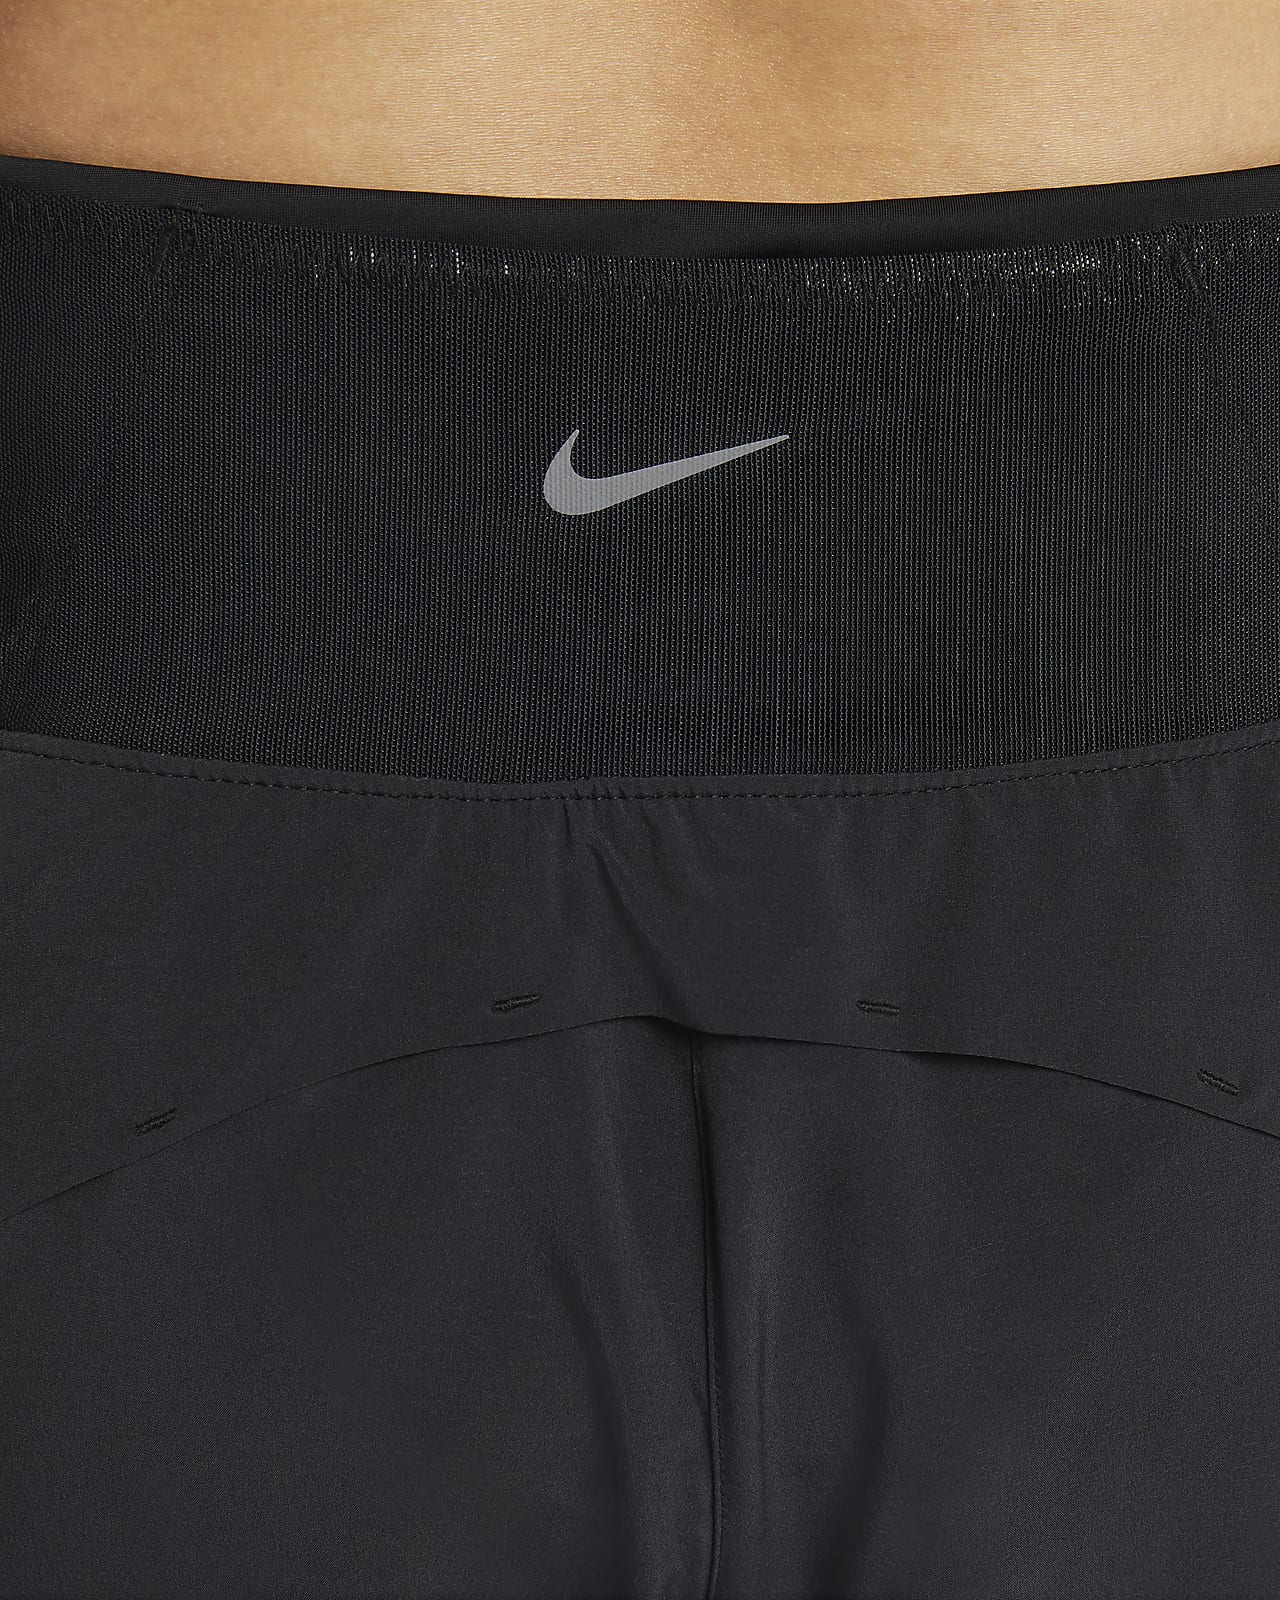 Nike Womens Fitness Running Athletic Pants 